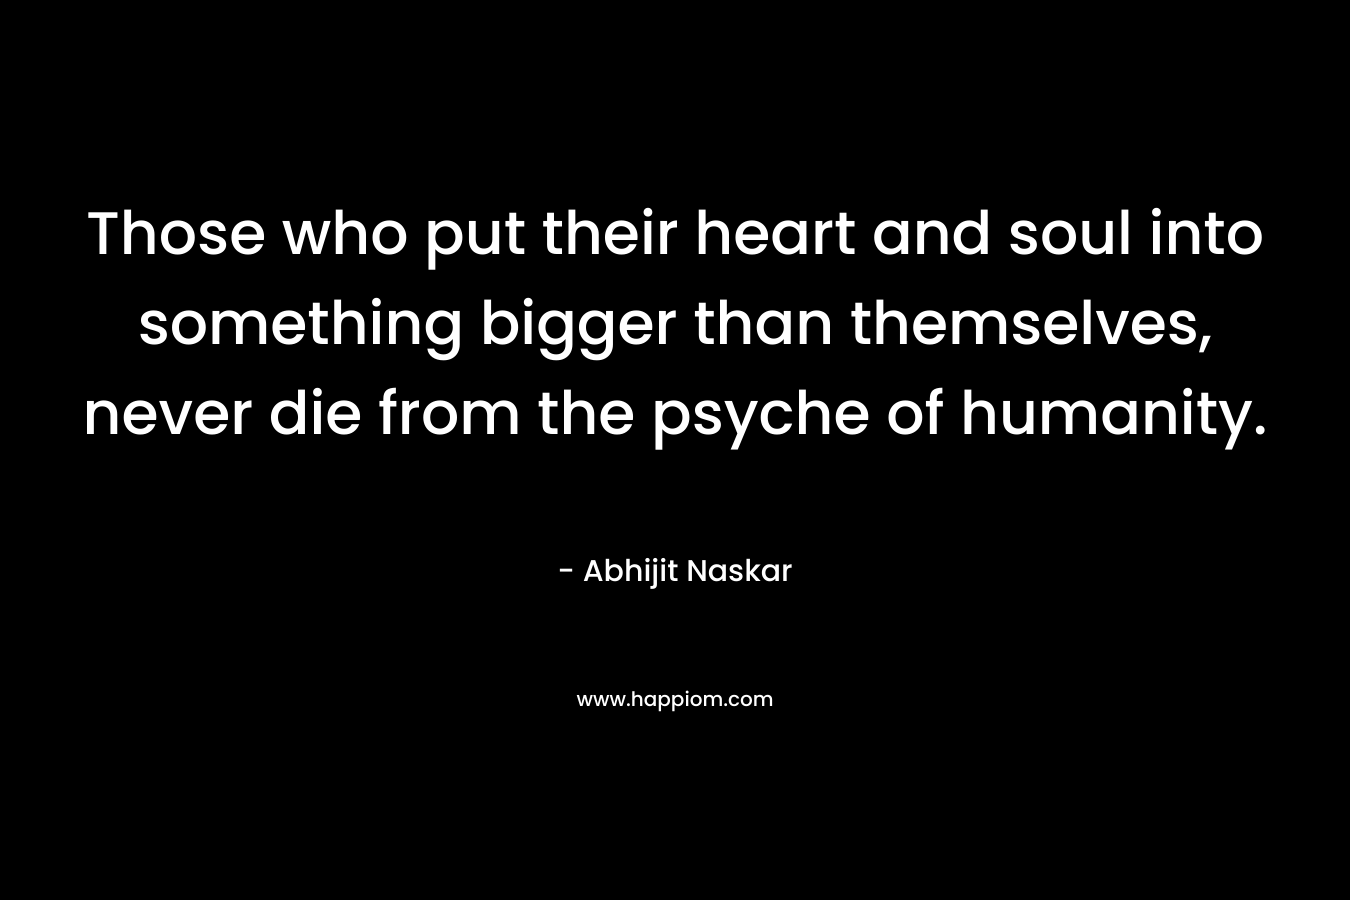 Those who put their heart and soul into something bigger than themselves, never die from the psyche of humanity. – Abhijit Naskar